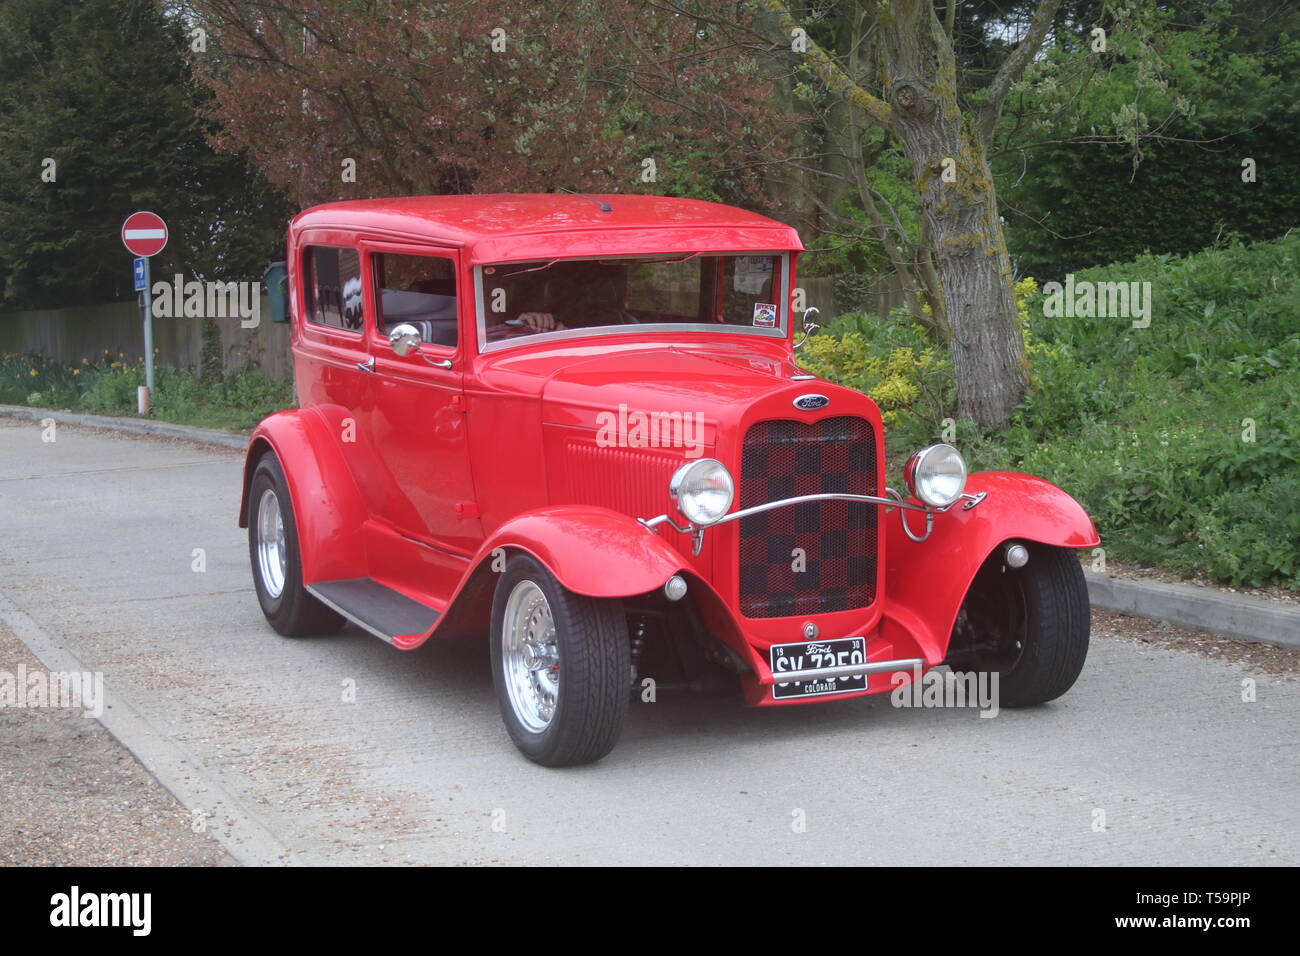 1930 CUSTOMISED FORD MODEL A COUPE VINTAGE RED CAR Stock Photo